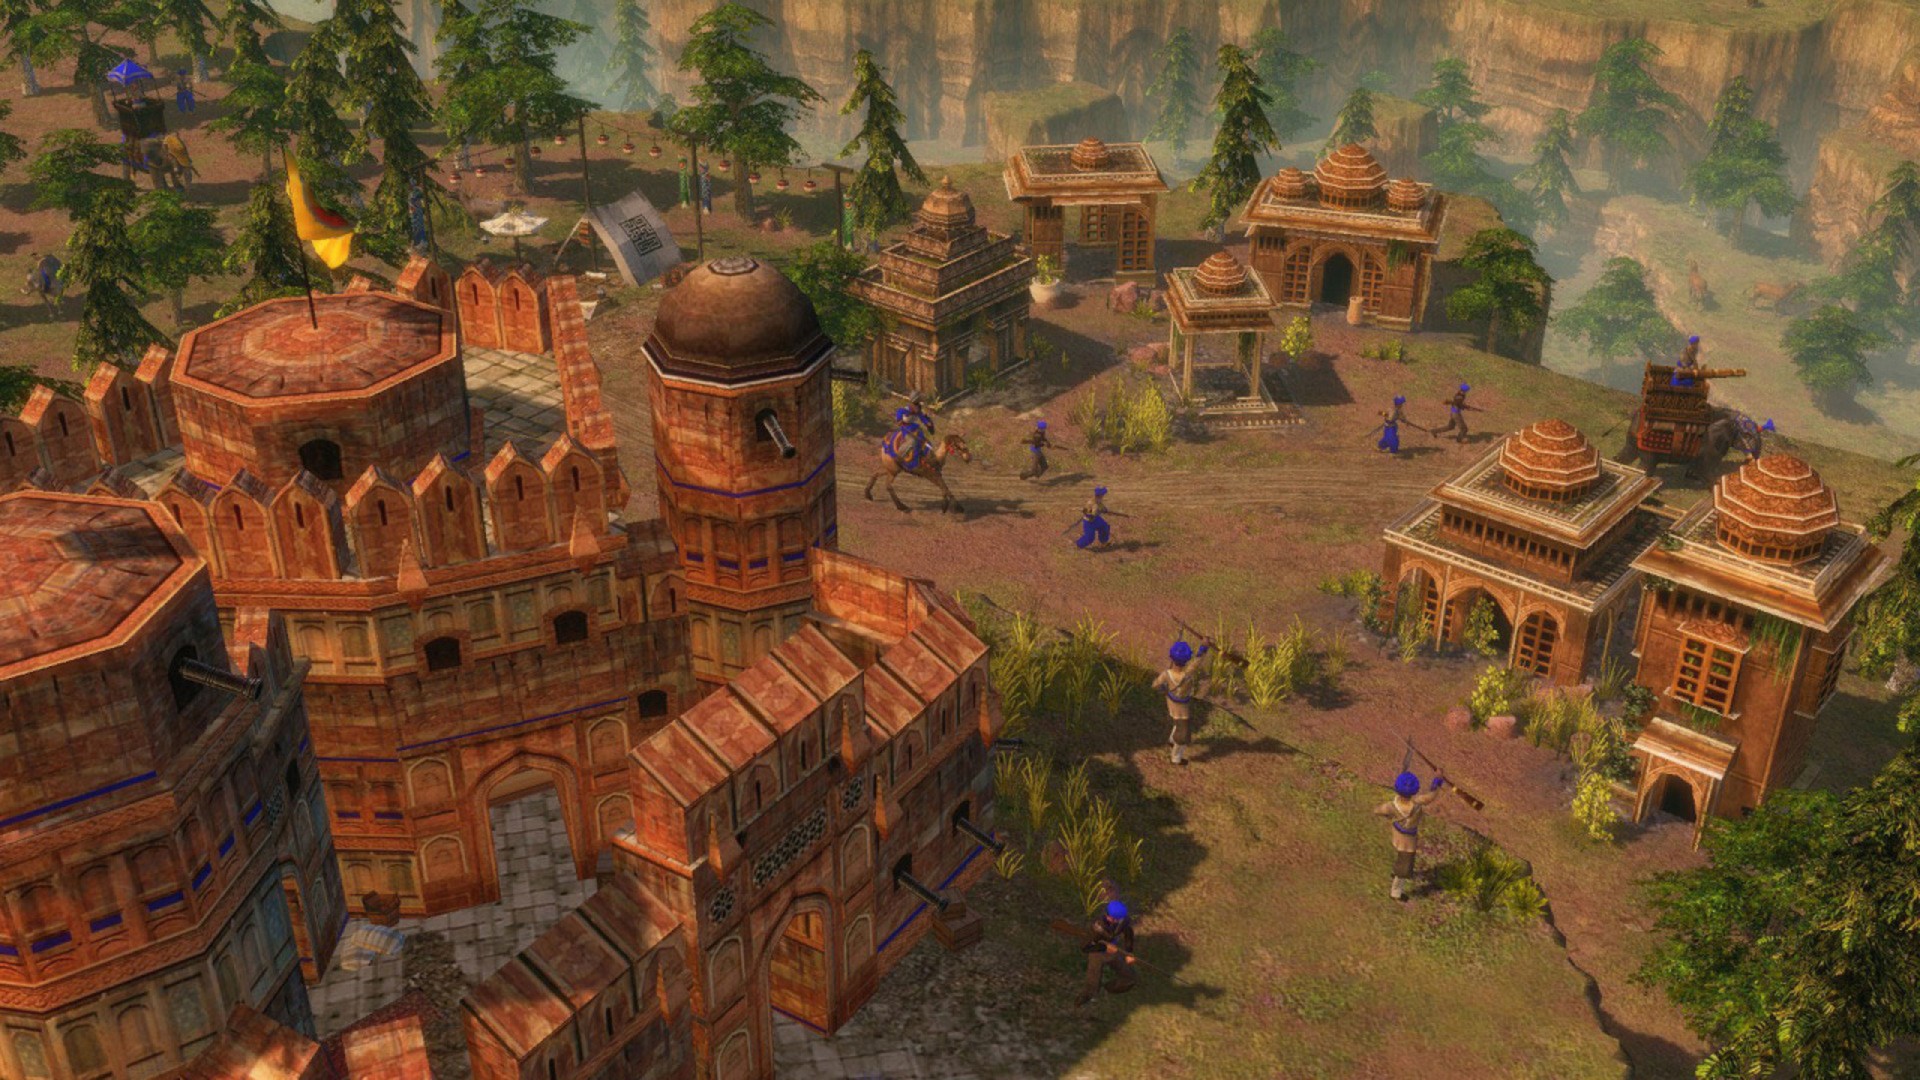 age of empires 3 buy online